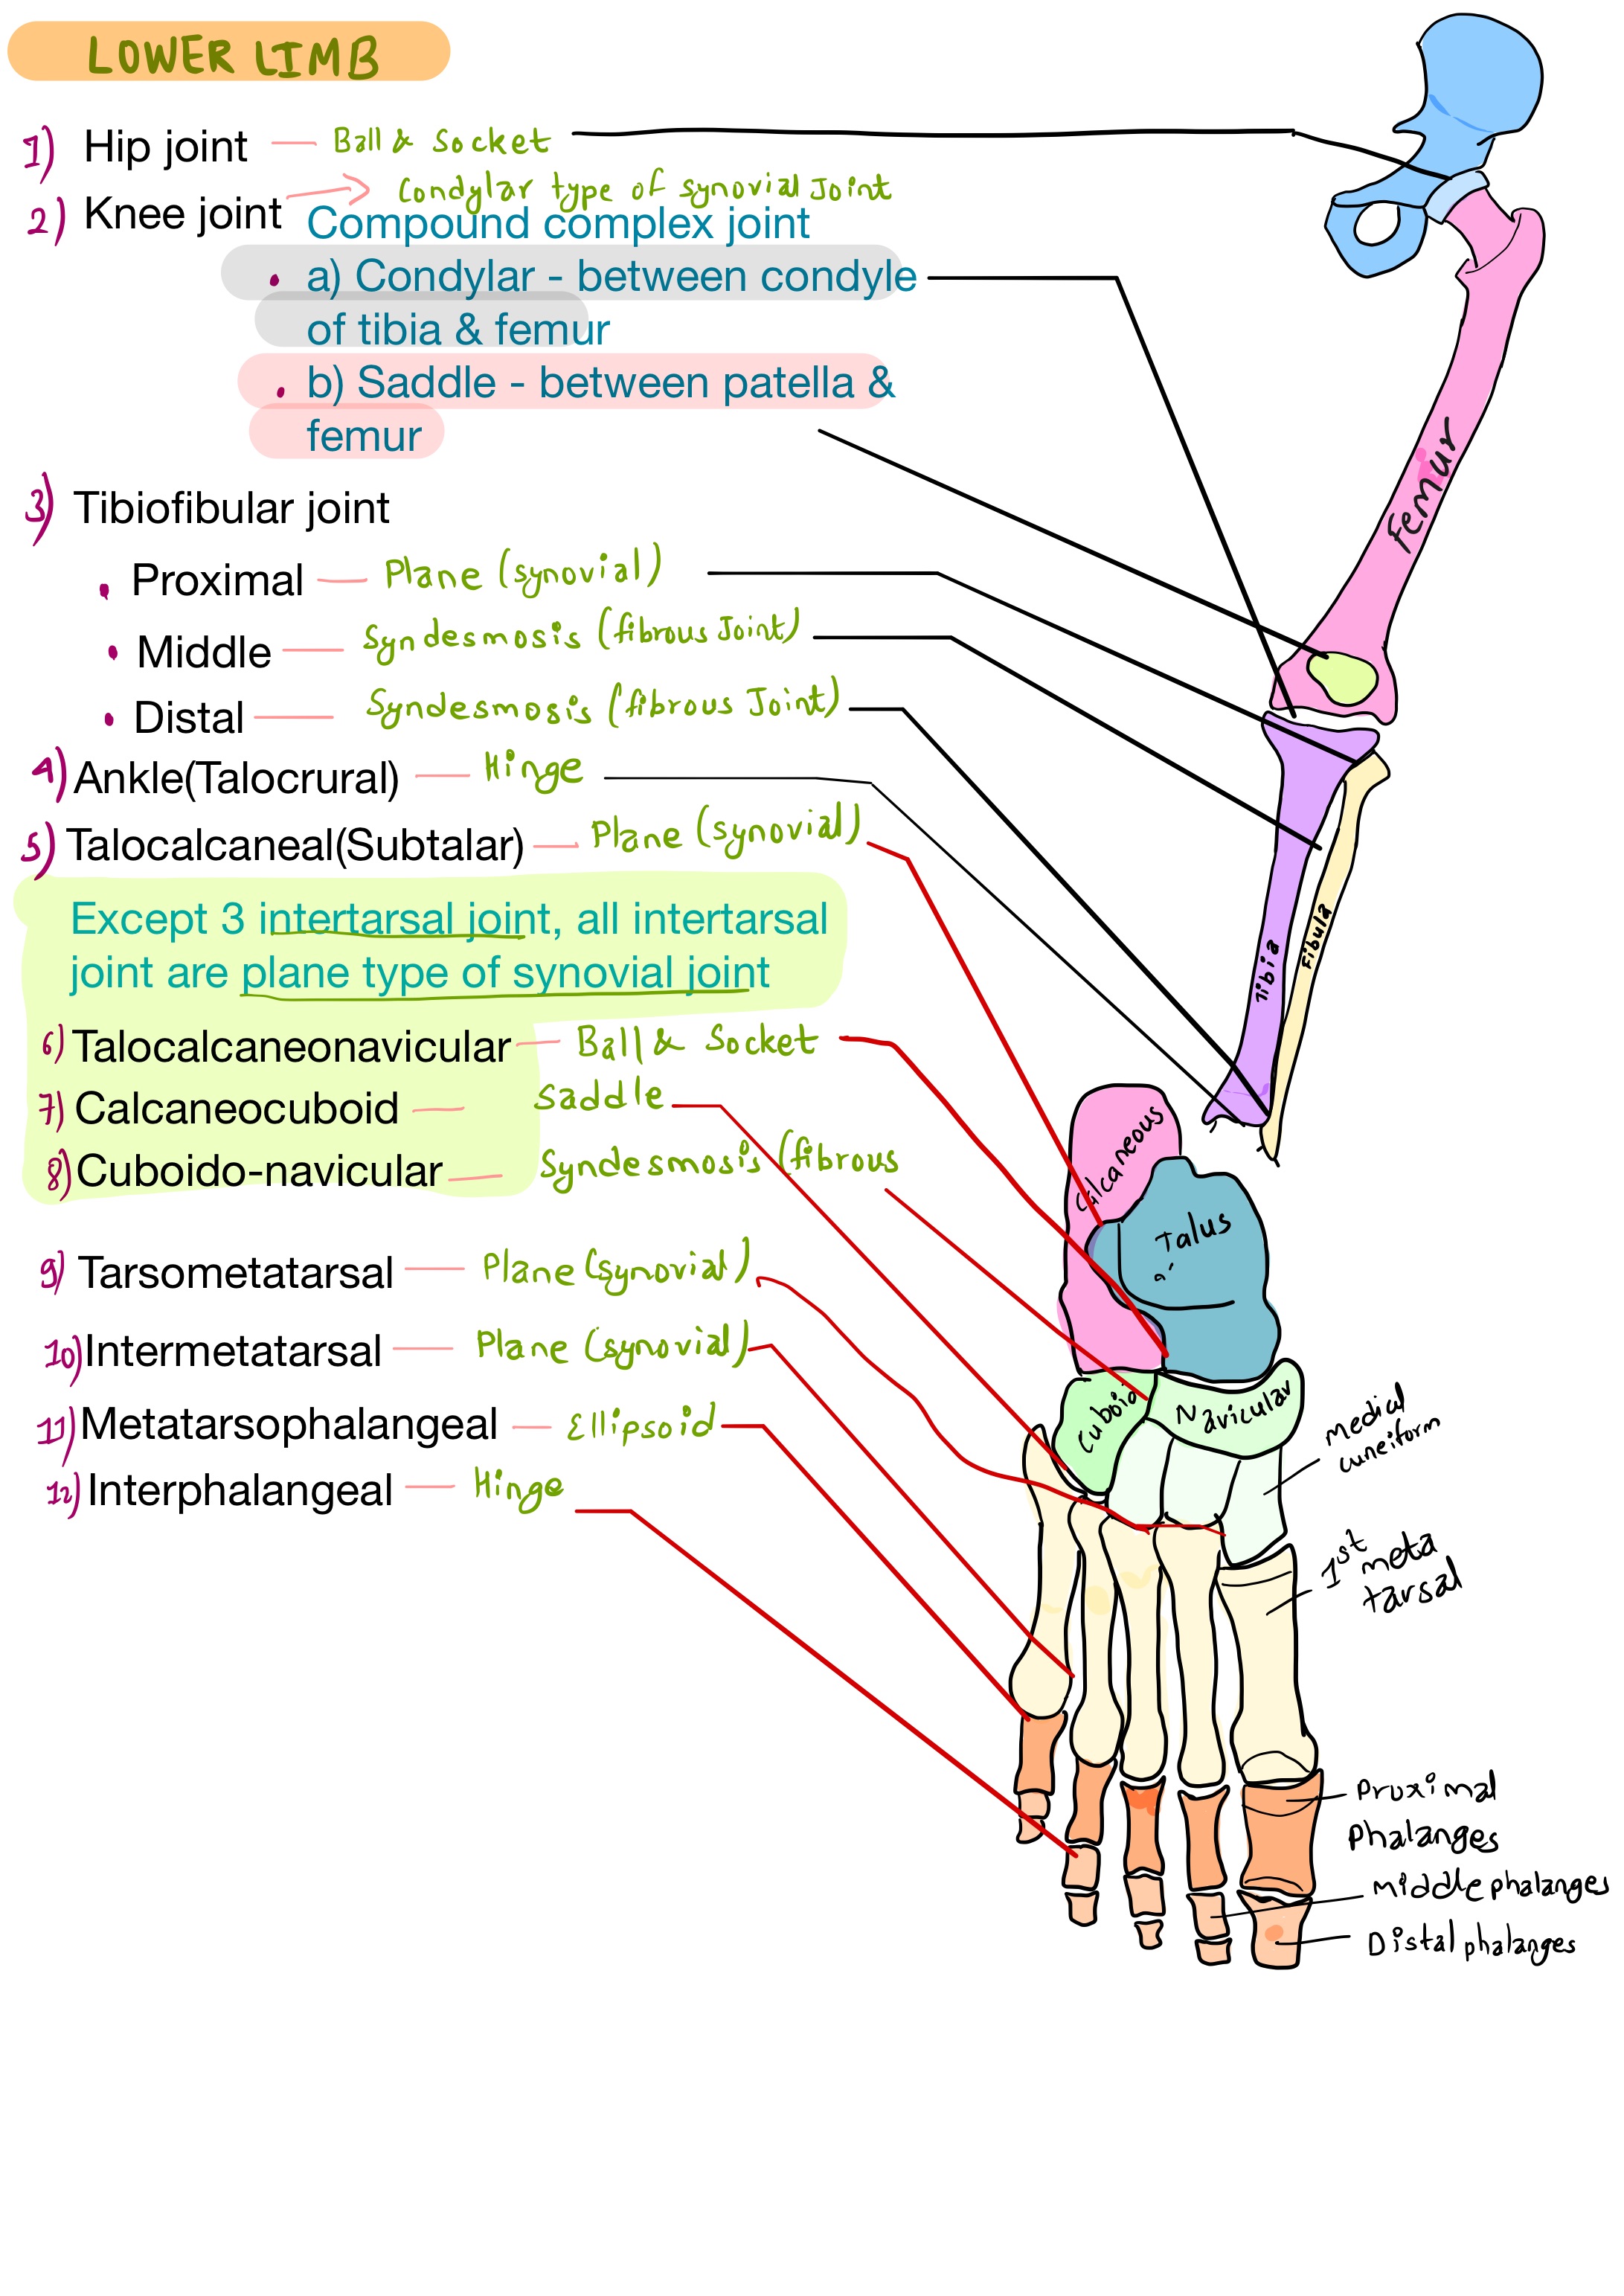 Joints of lower limb and their types